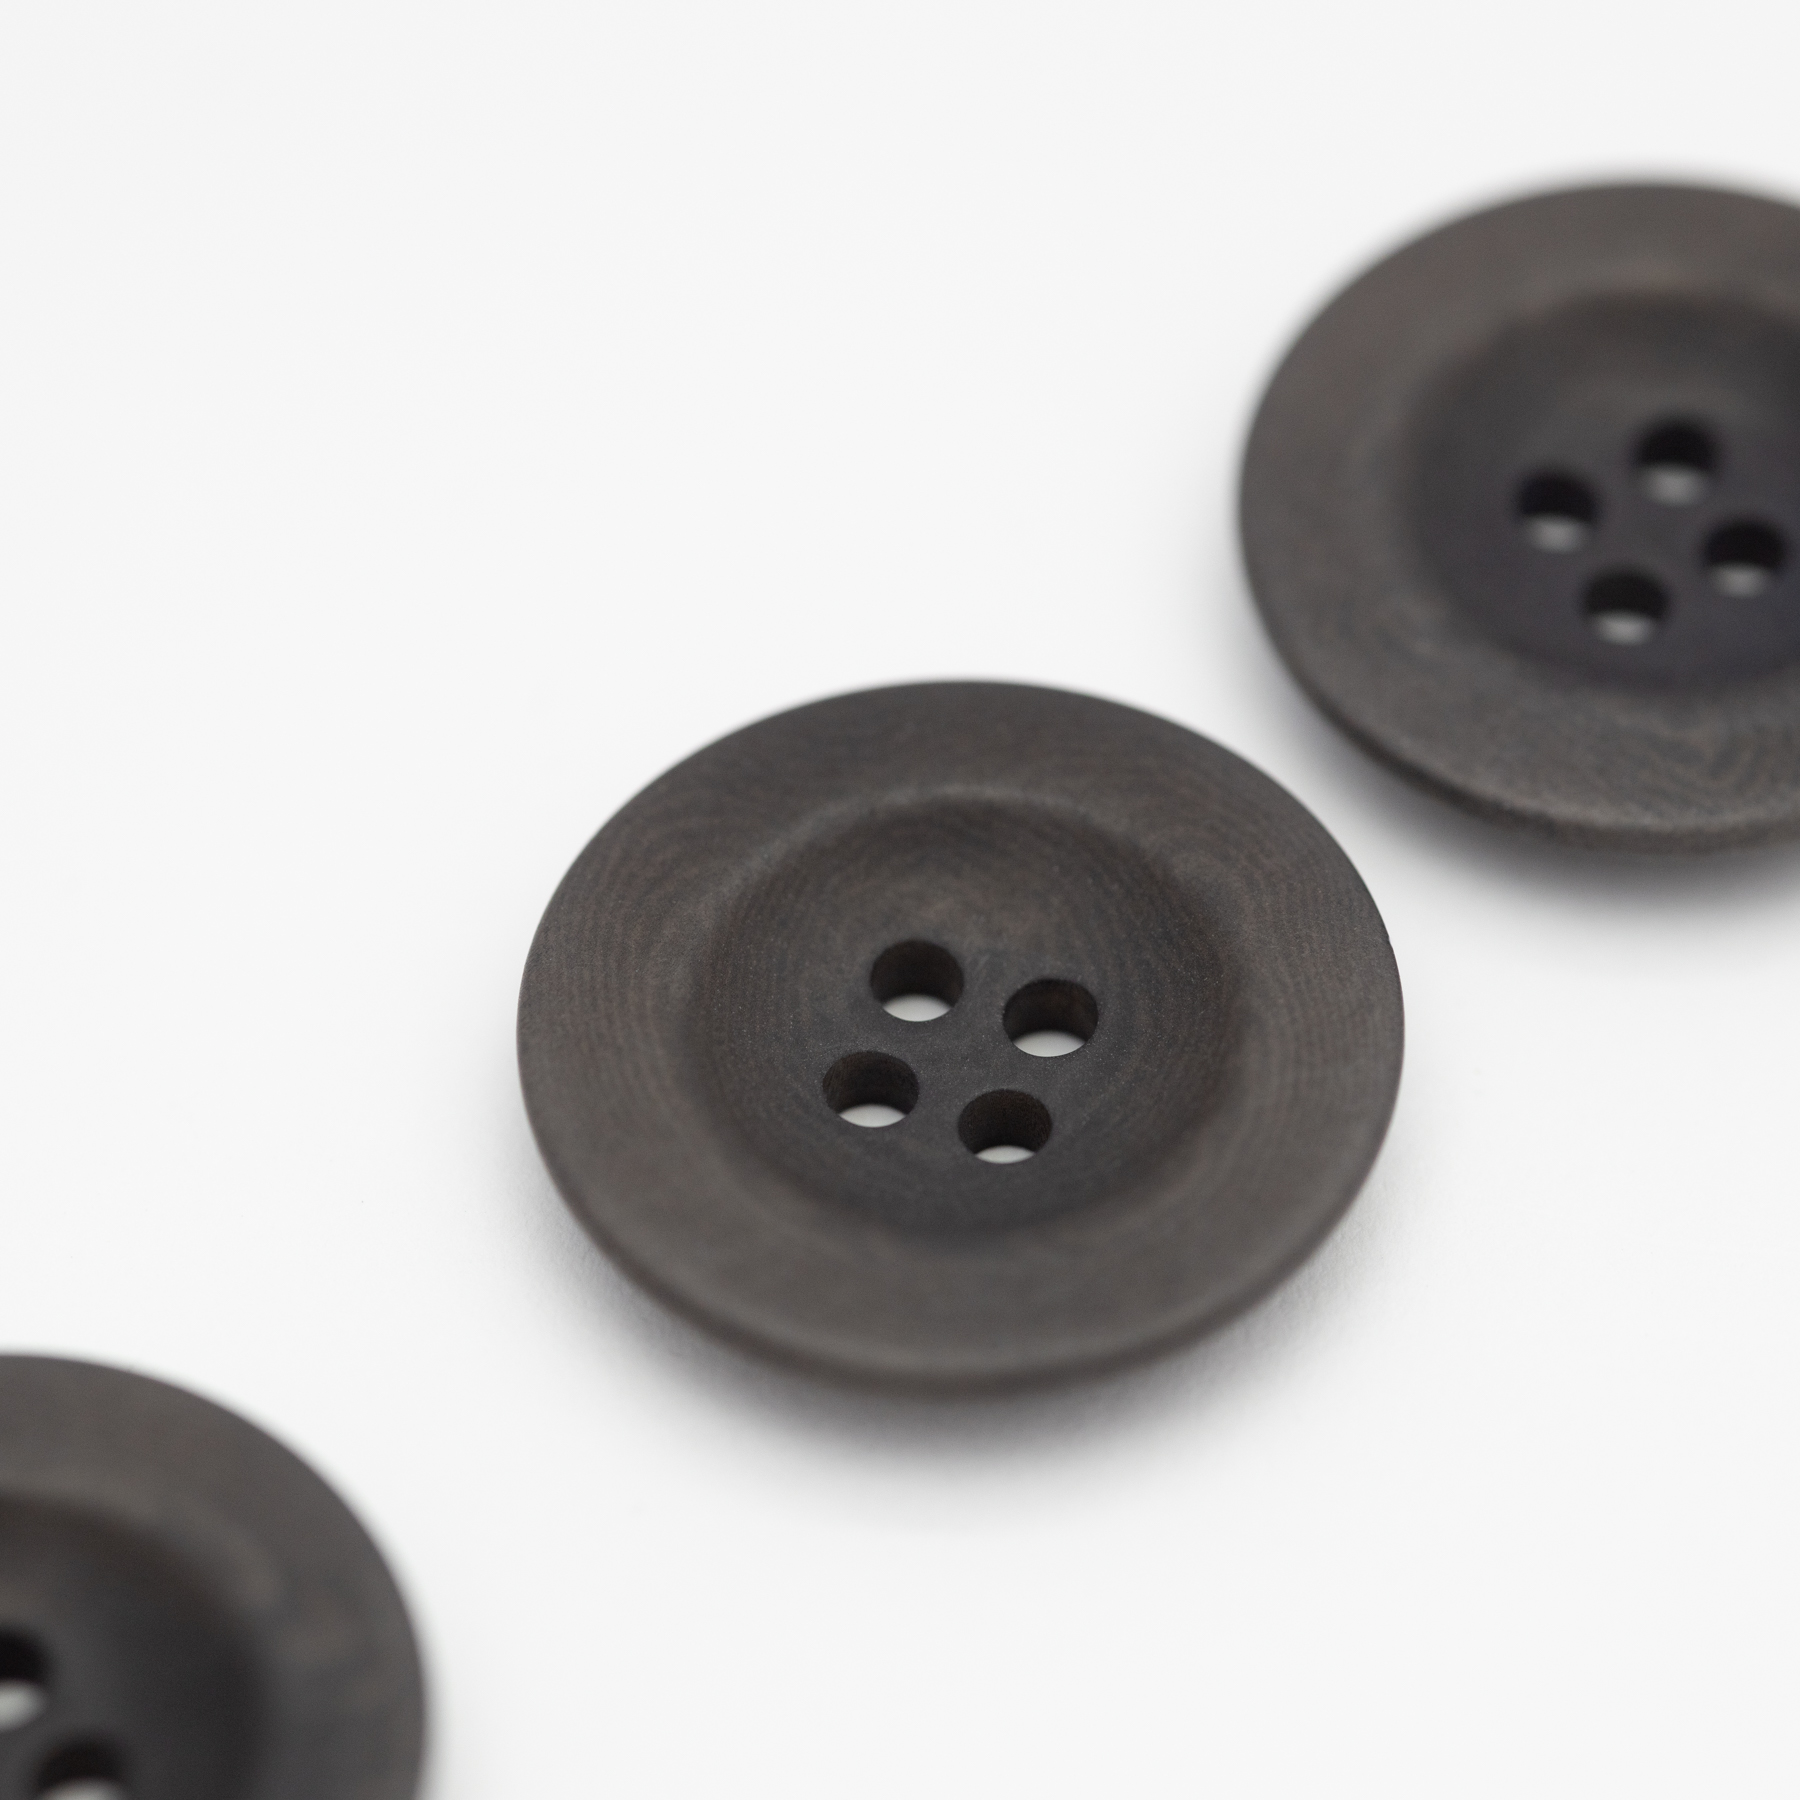 Grey Corozo Buttons 22mm